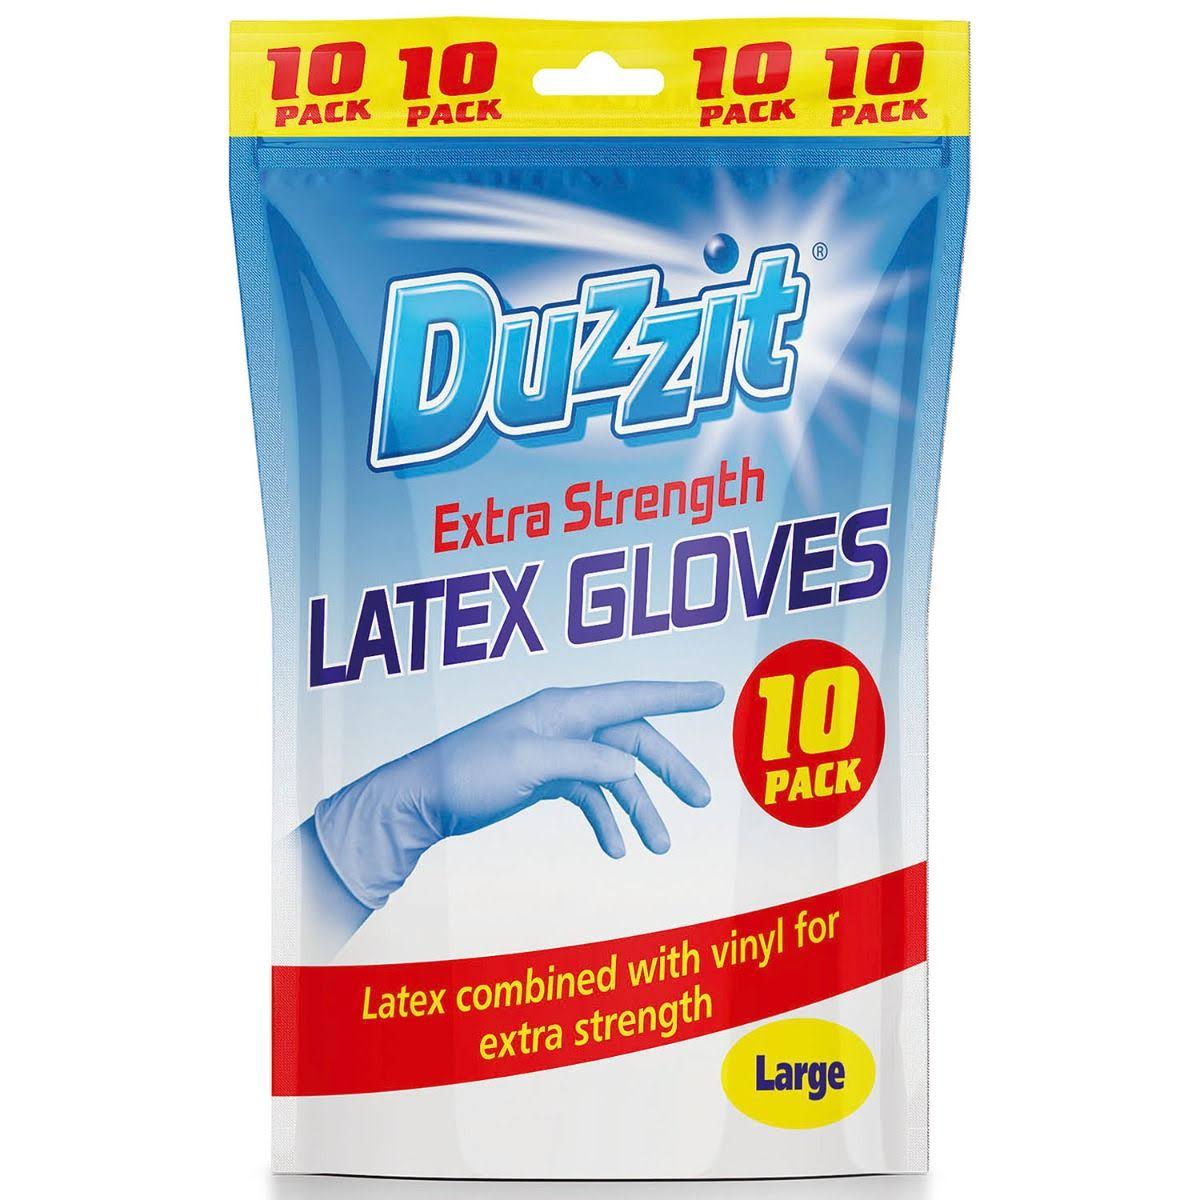 Duzzit Extra Strength Latex & Vinyl Household Gloves, 10 Pairs - Large